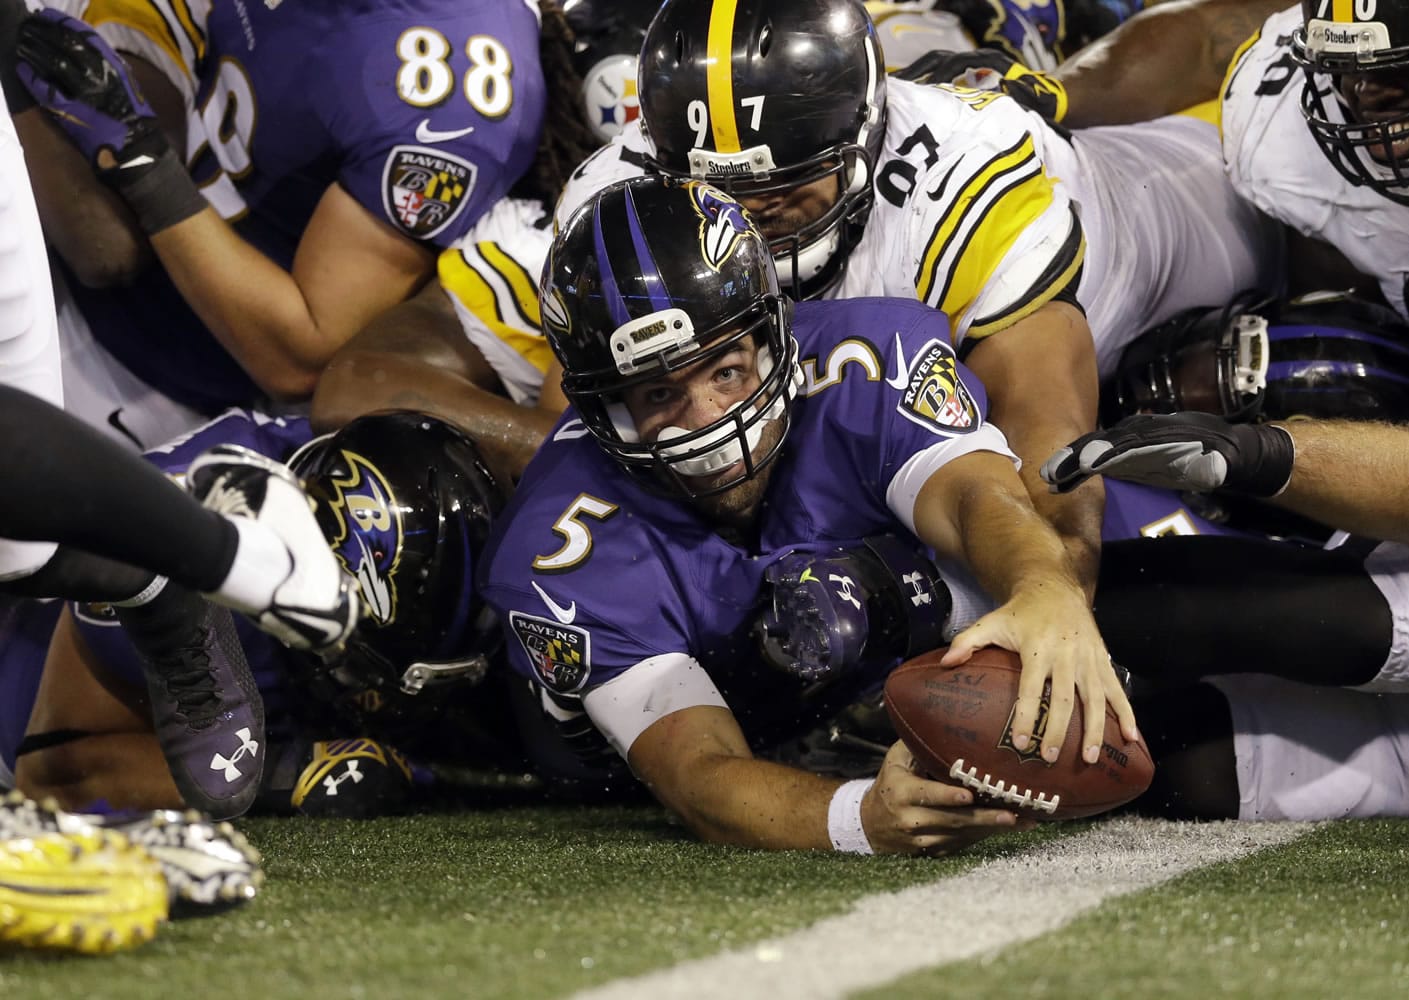 Baltimore Ravens quarterback Joe Flacco (5) is just short of a touchdown as he is hit by Pittsburgh Steelers defensive end Cameron Heyward (97) and other defenders during the second half Thursday, Sept. 11, 2014, in Baltimore. The Ravens won 26-6.